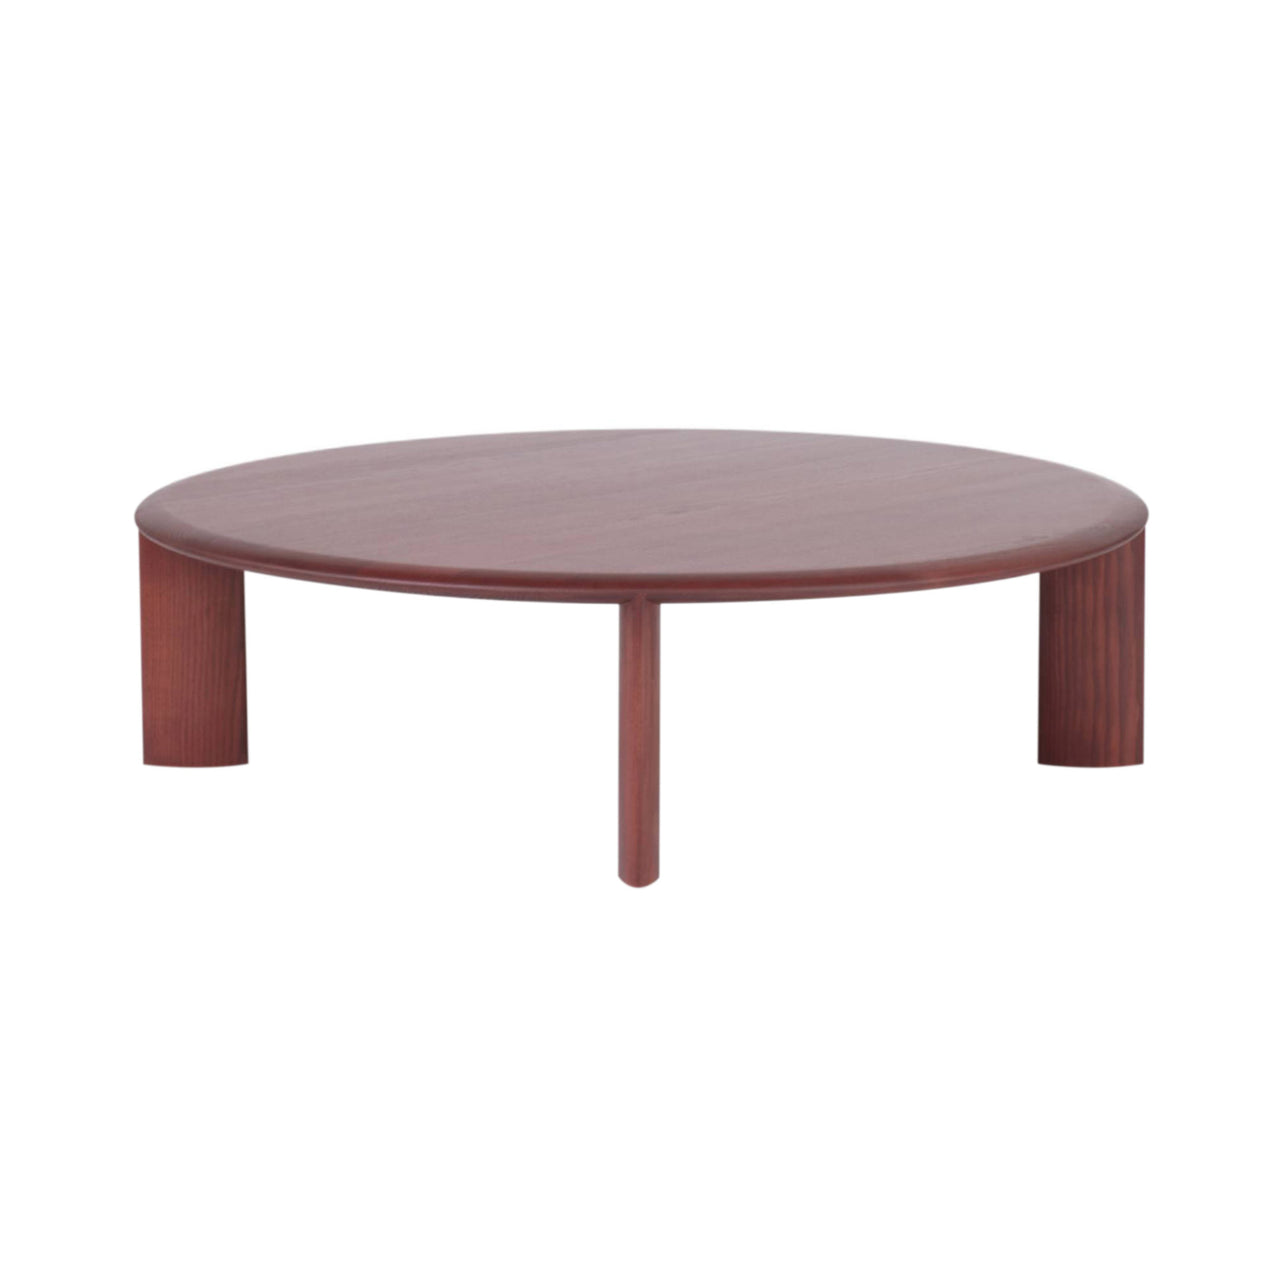 IO Coffee Table: Large + Vintage Red